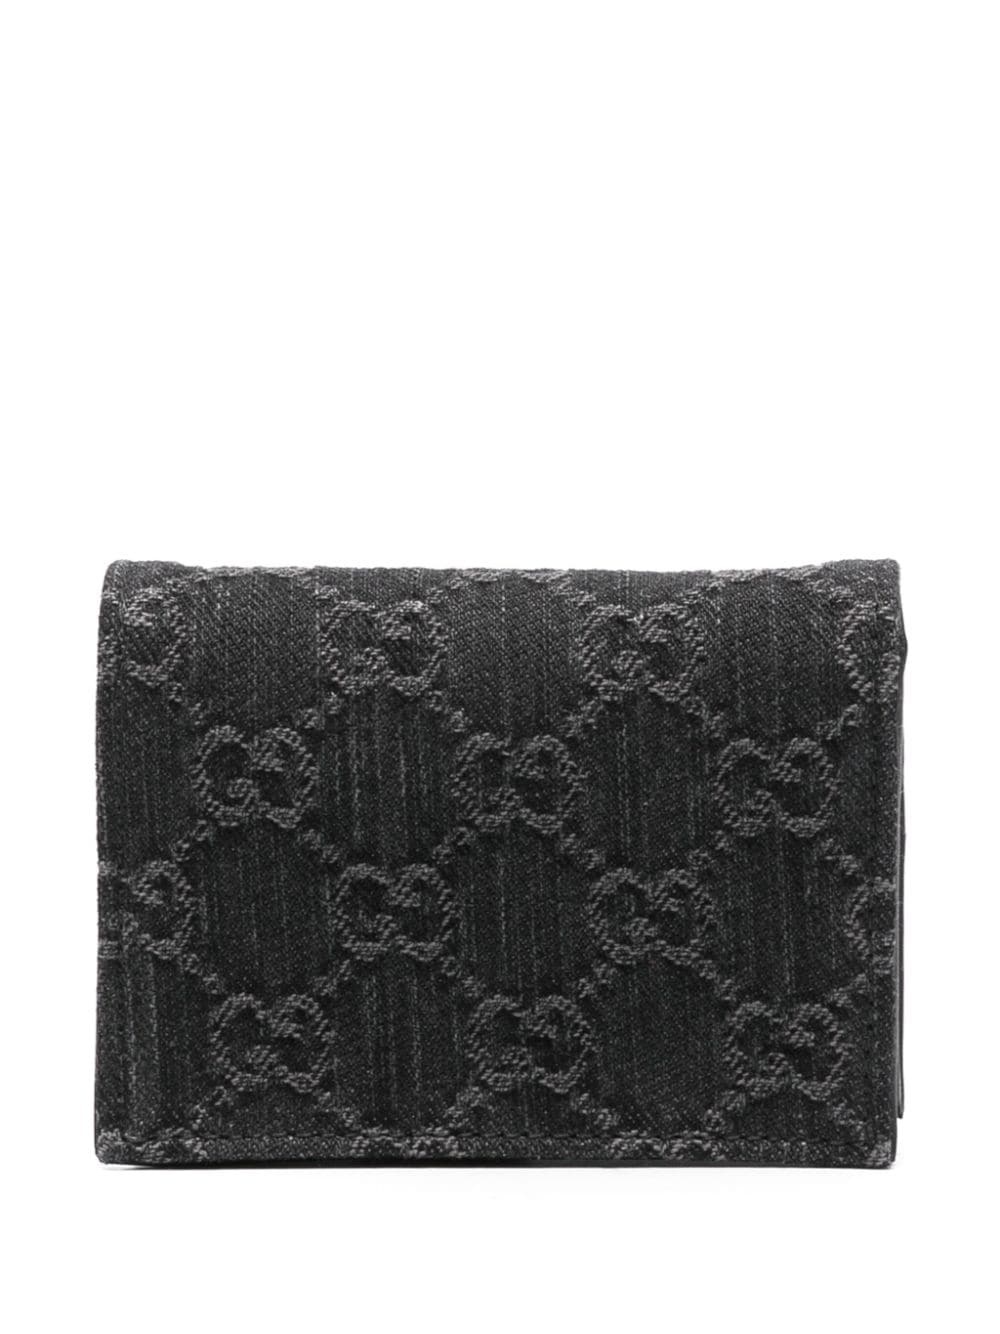 GG-supreme leather wallet - 2